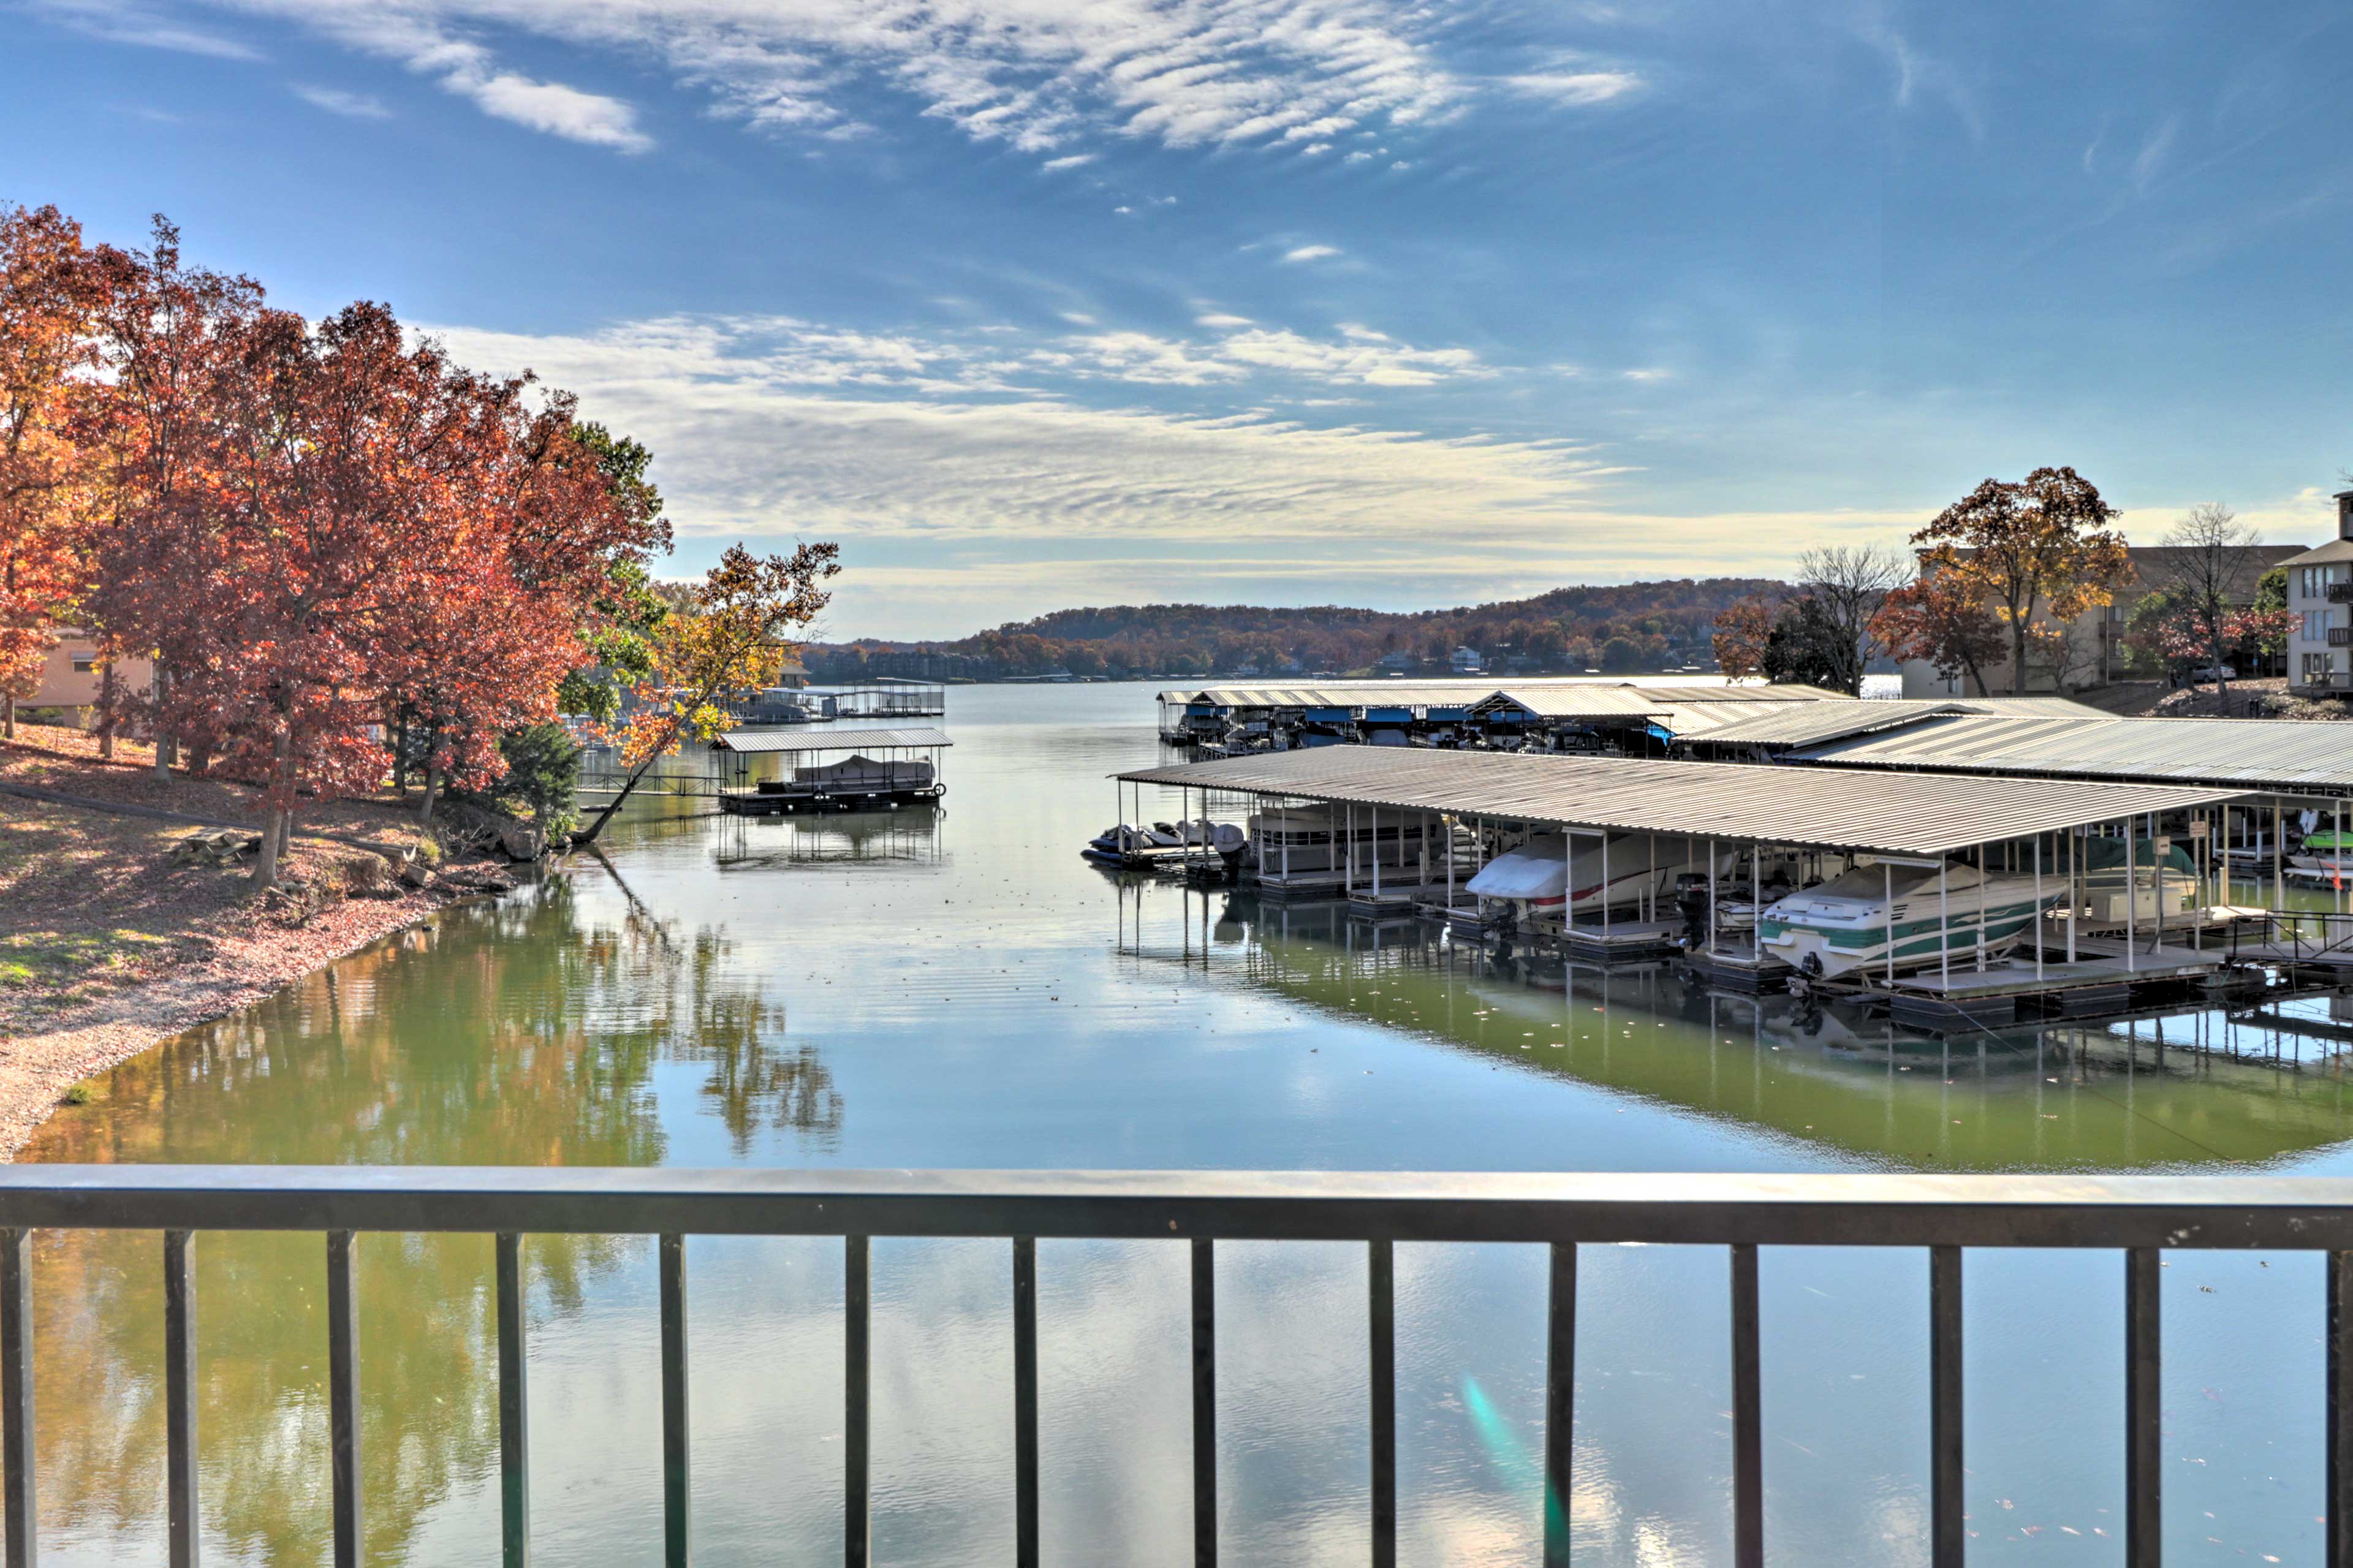 claire rousseau recommends pirates cove lake of the ozarks pic